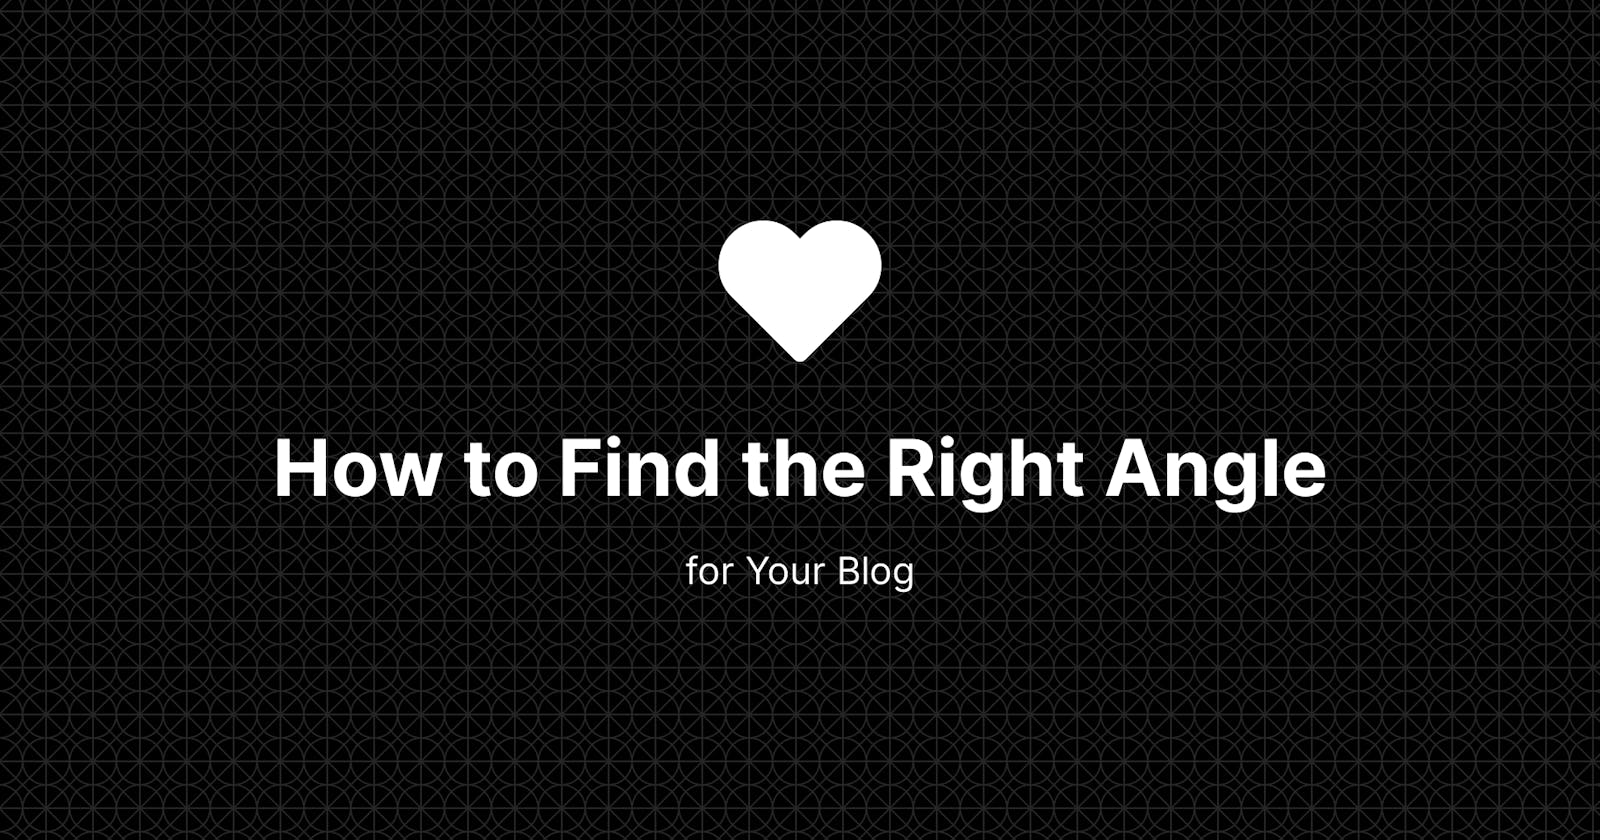 How to Find the Right Angle for Your Blog